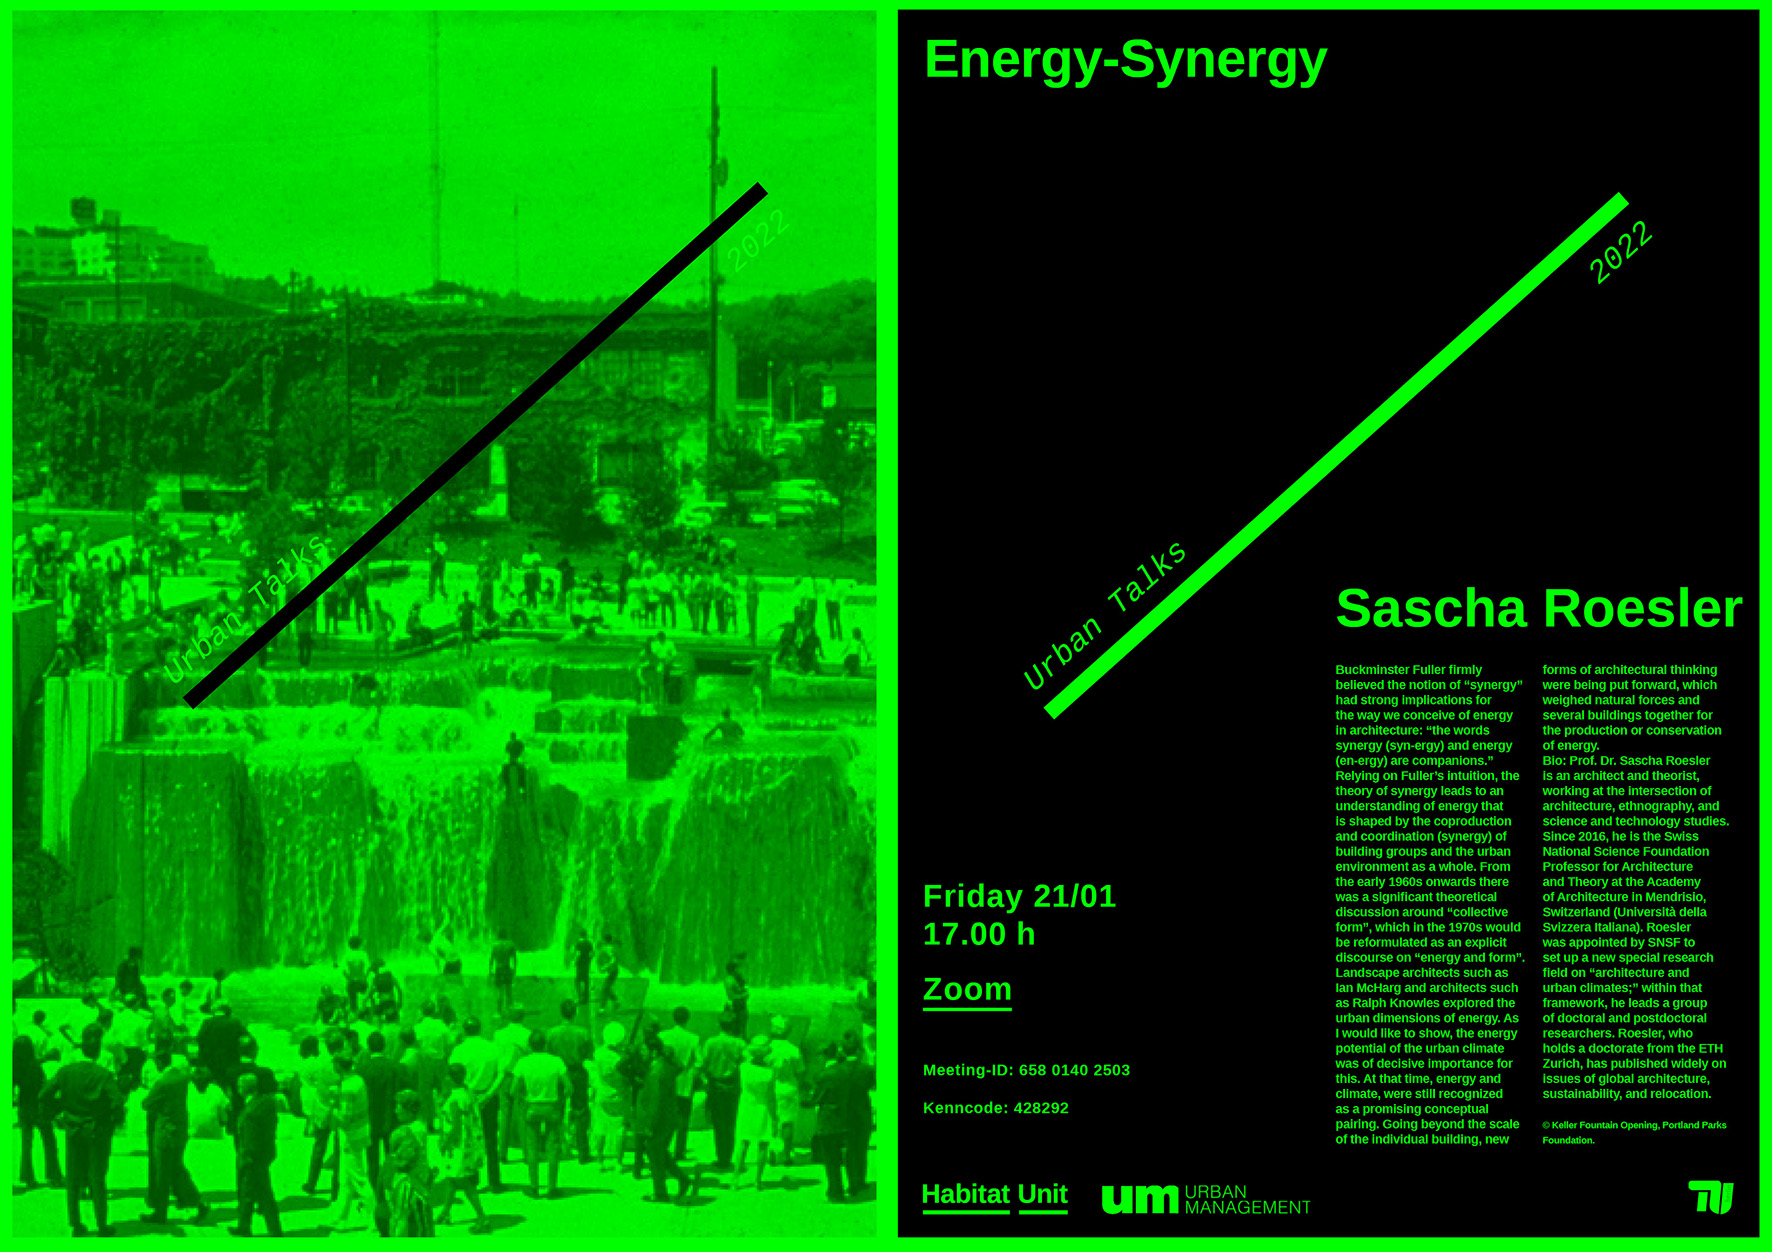 Lecture on “Energy-Synergy” by Sascha Roesler, invited by Prof. Dr. Elke Beyer, Habitat-Unit, TU Berlin, January 21, 2022